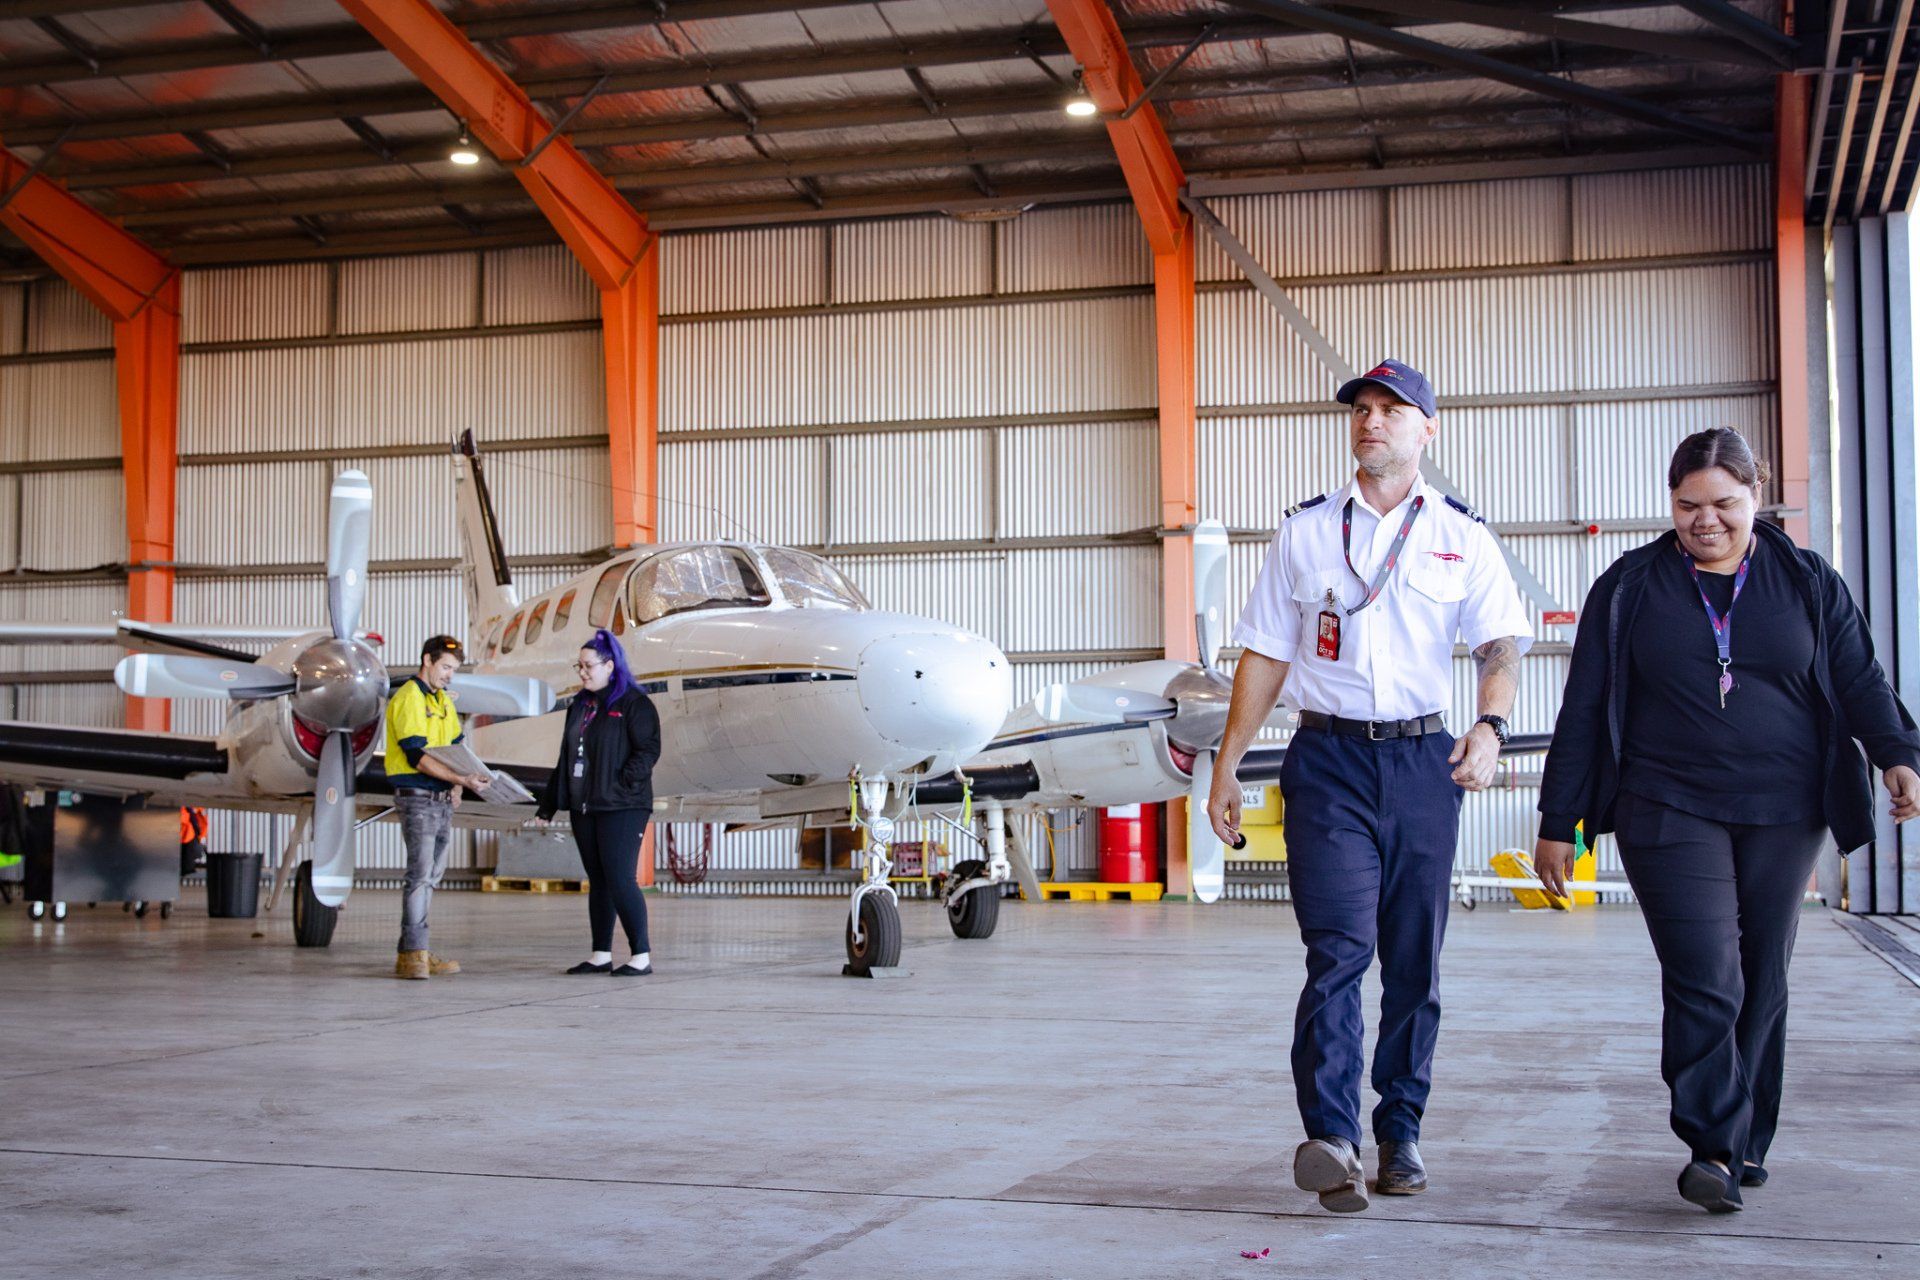 Chartair's team member Jaylene and colleagues walking in a hanger